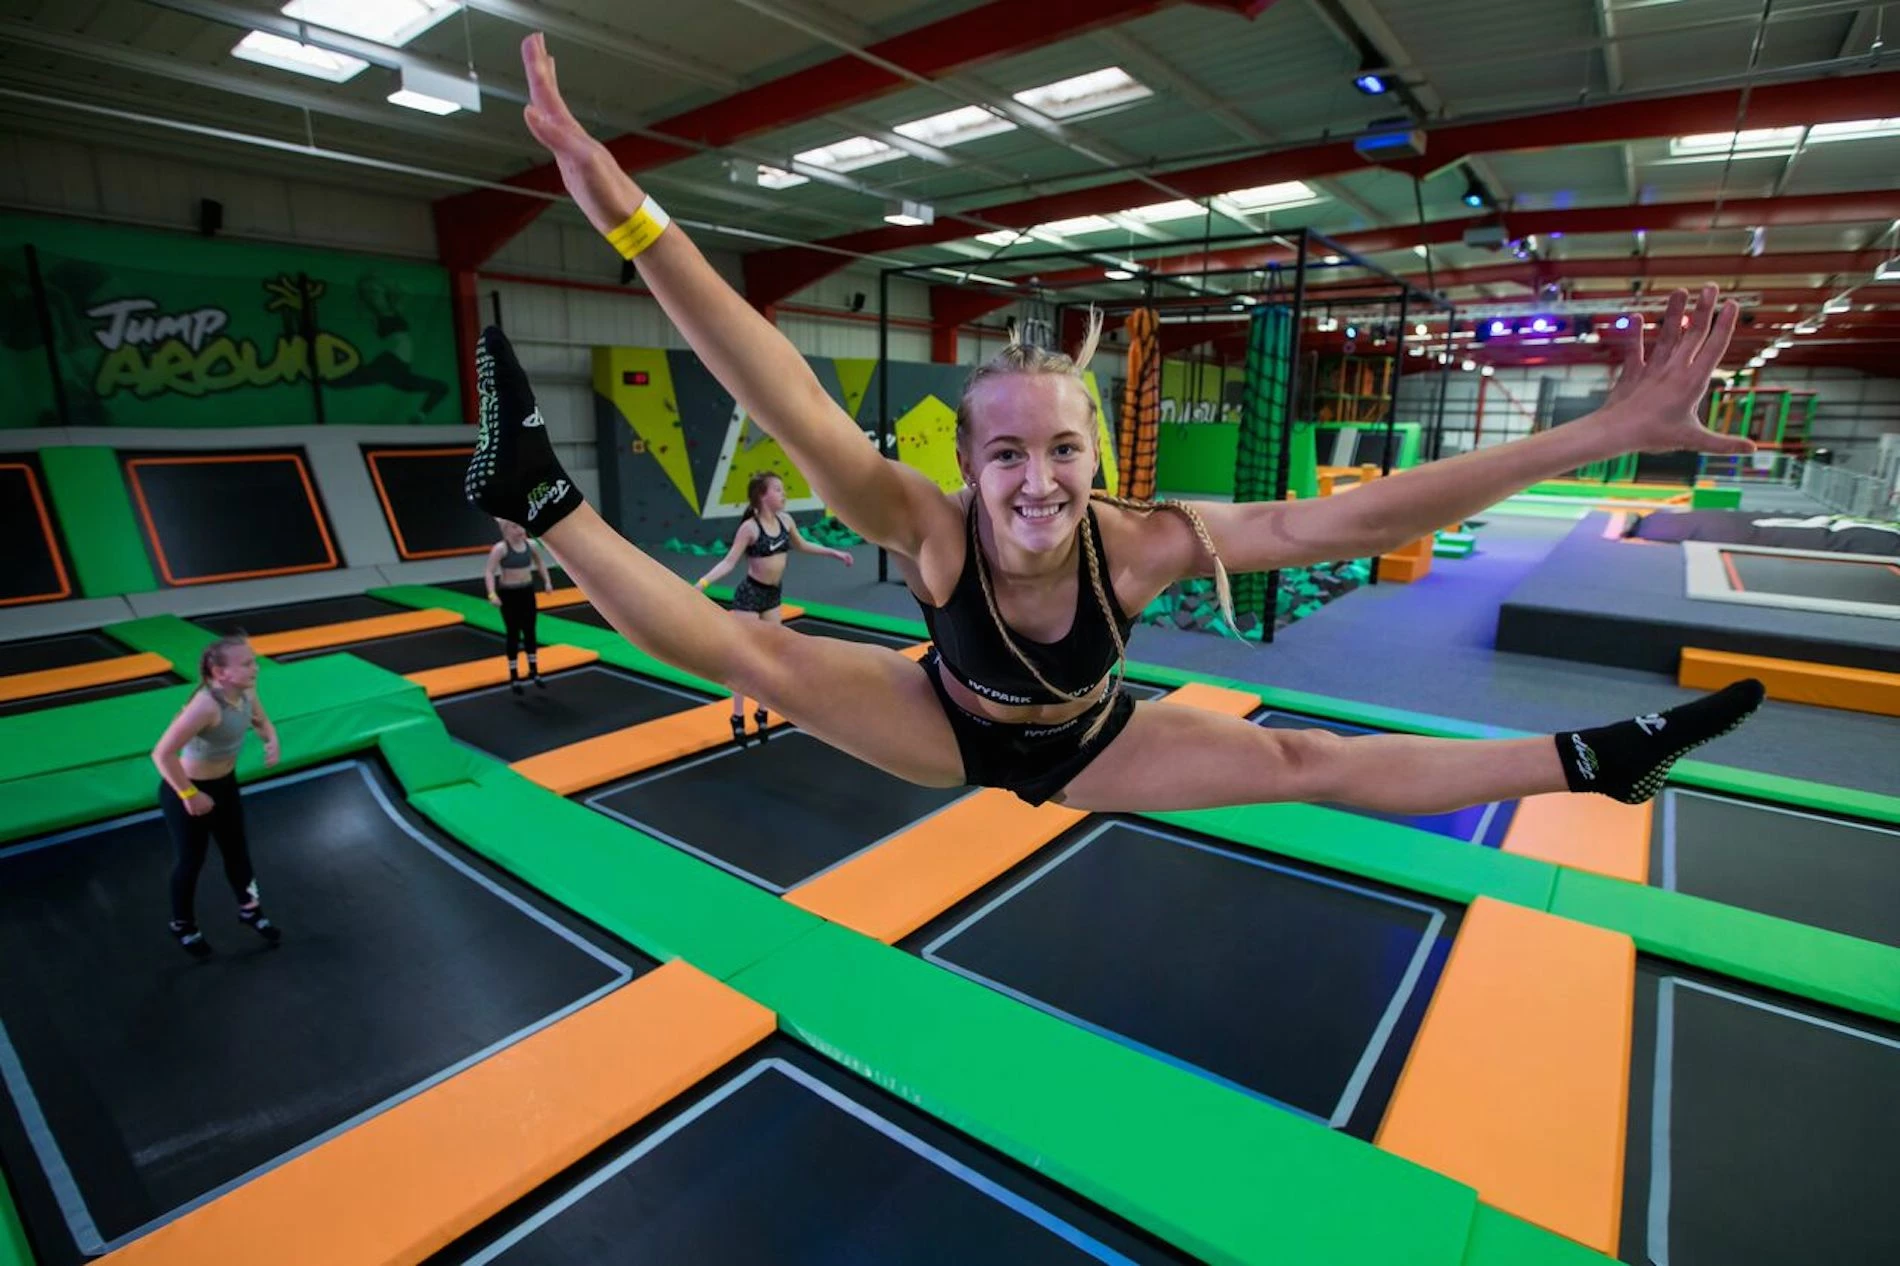 The new Jump 360 venue will open at Benton Business Park. 